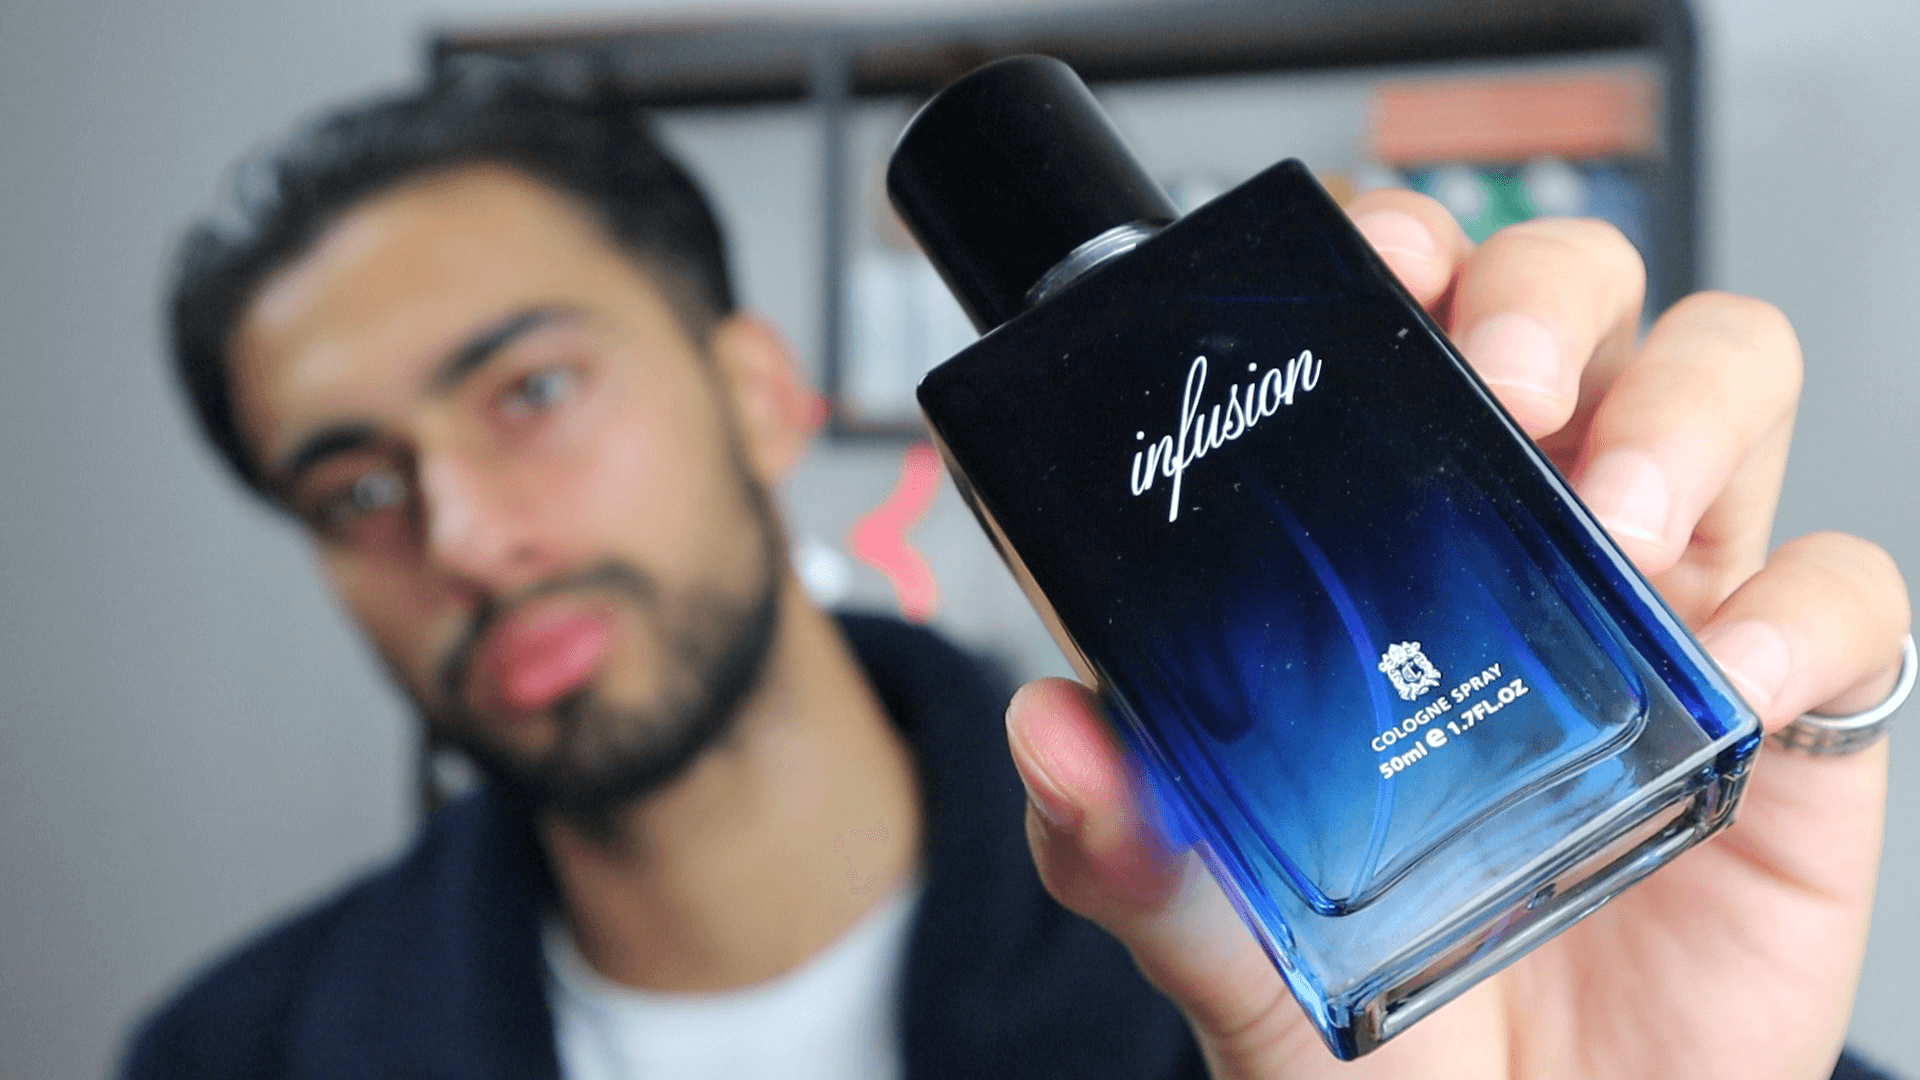 Conzuri Infused Cologne (Honest Review)